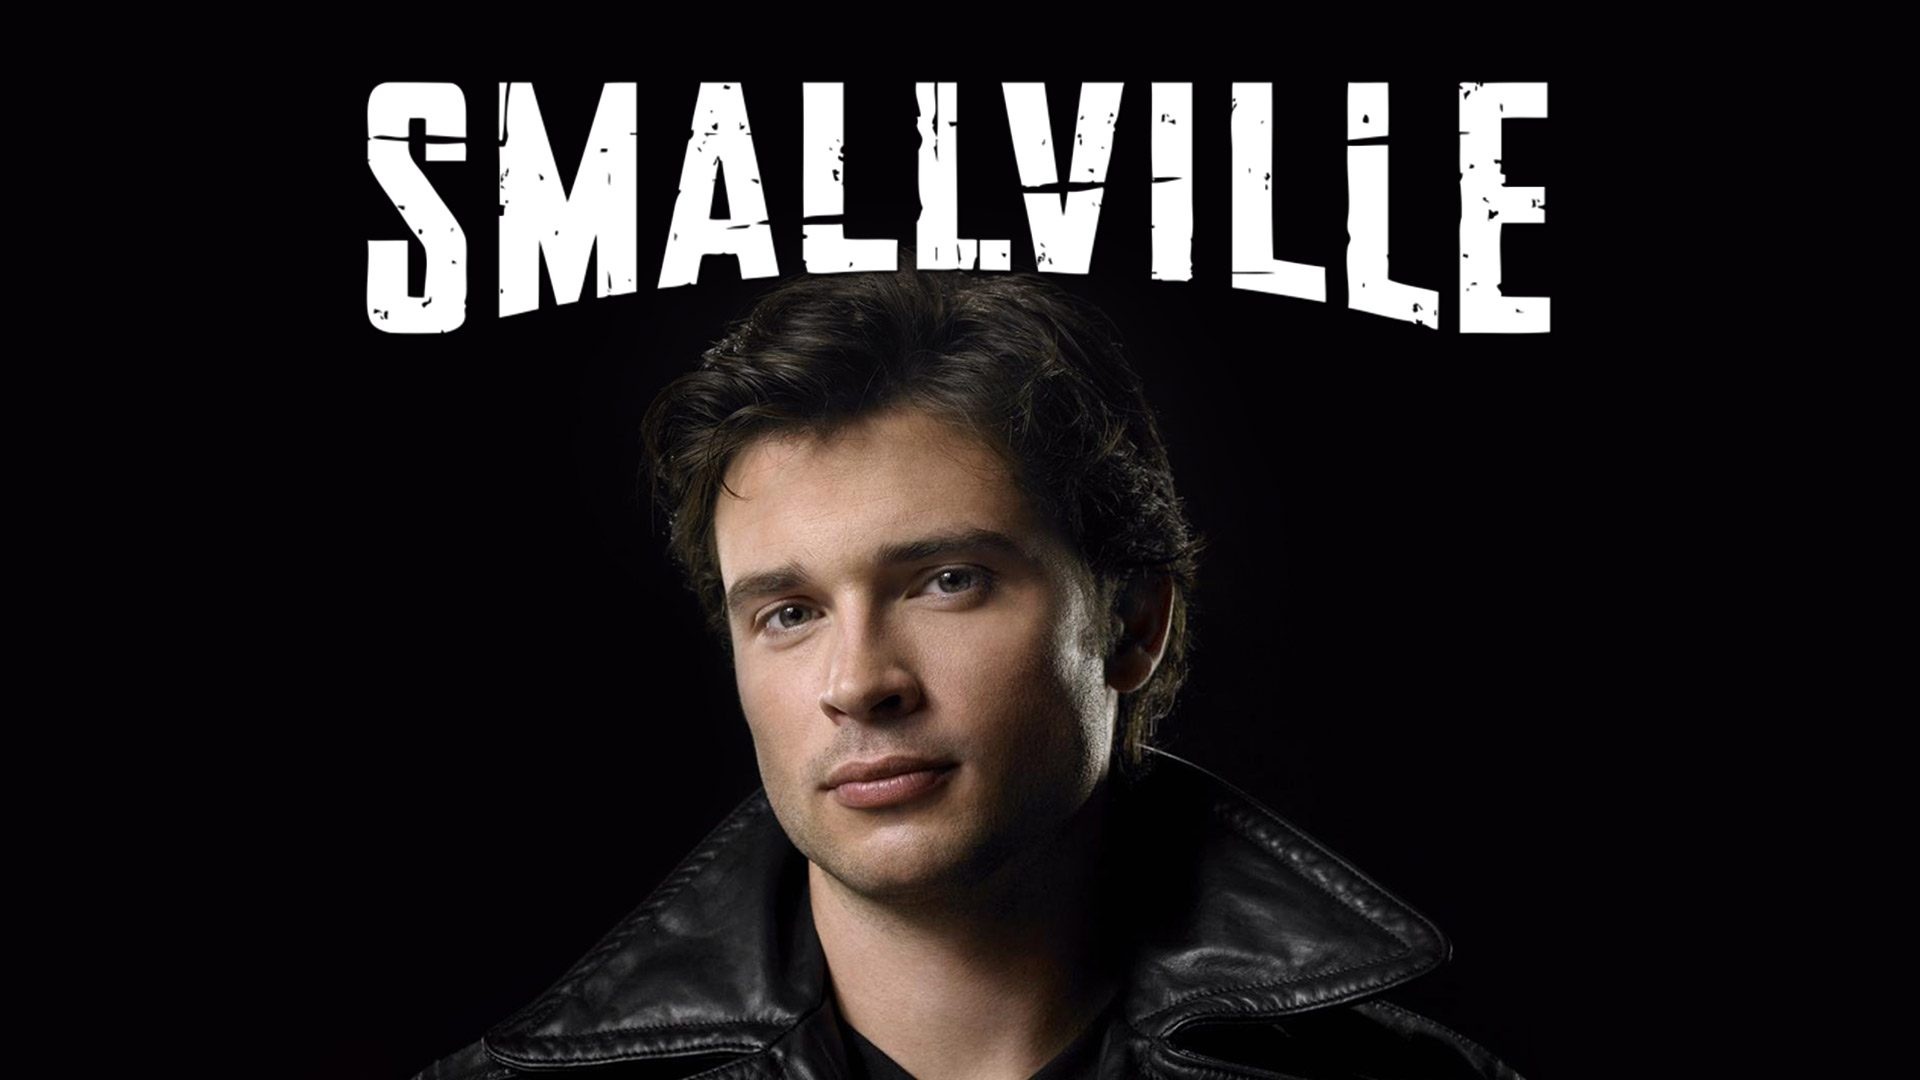 Smallville (TV Series): Clark Kent, A fictional character and the main protagonist, The WB/CW television series. 1920x1080 Full HD Background.